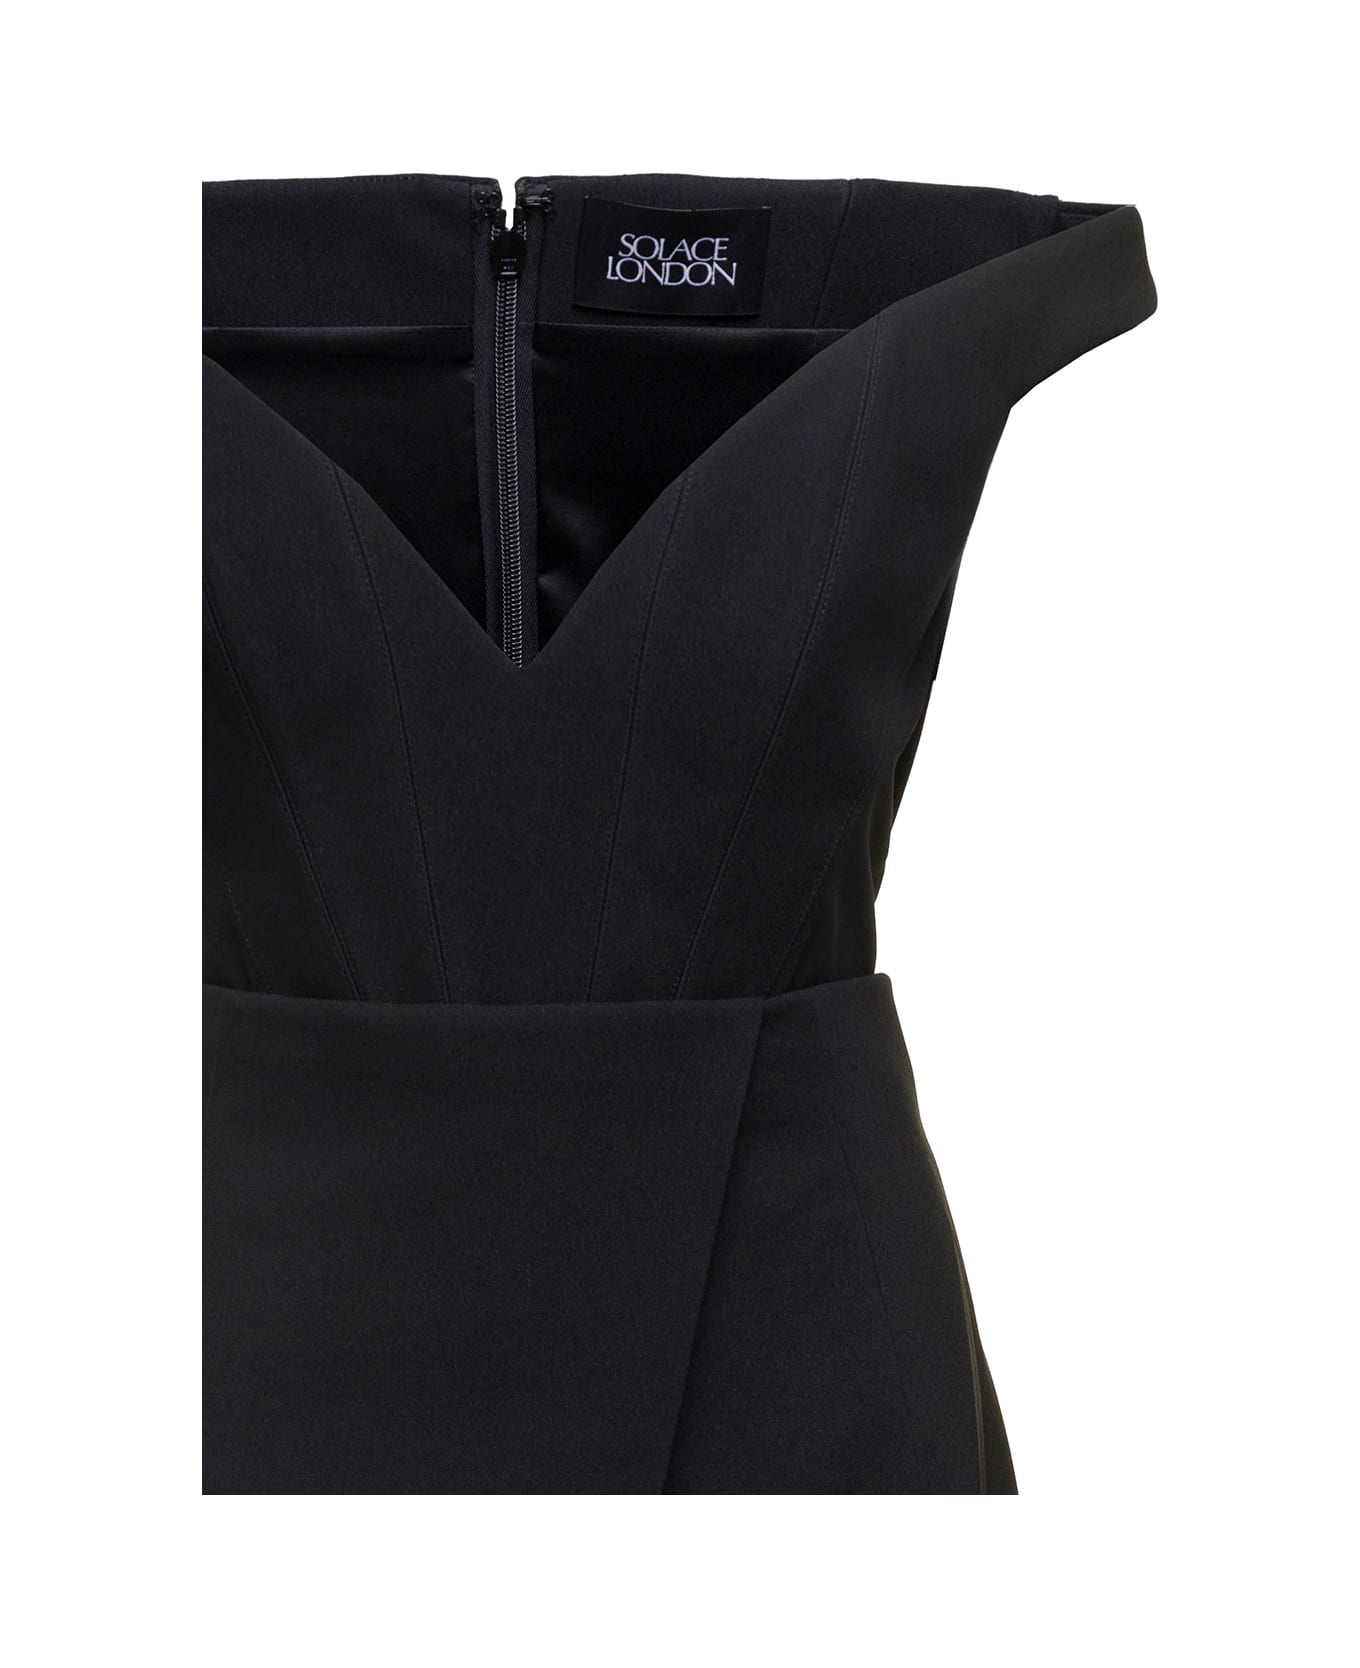 Solace London Black Midi Dress With Flared Skirt And Asymmetric Vent In Polyester Woman - Black